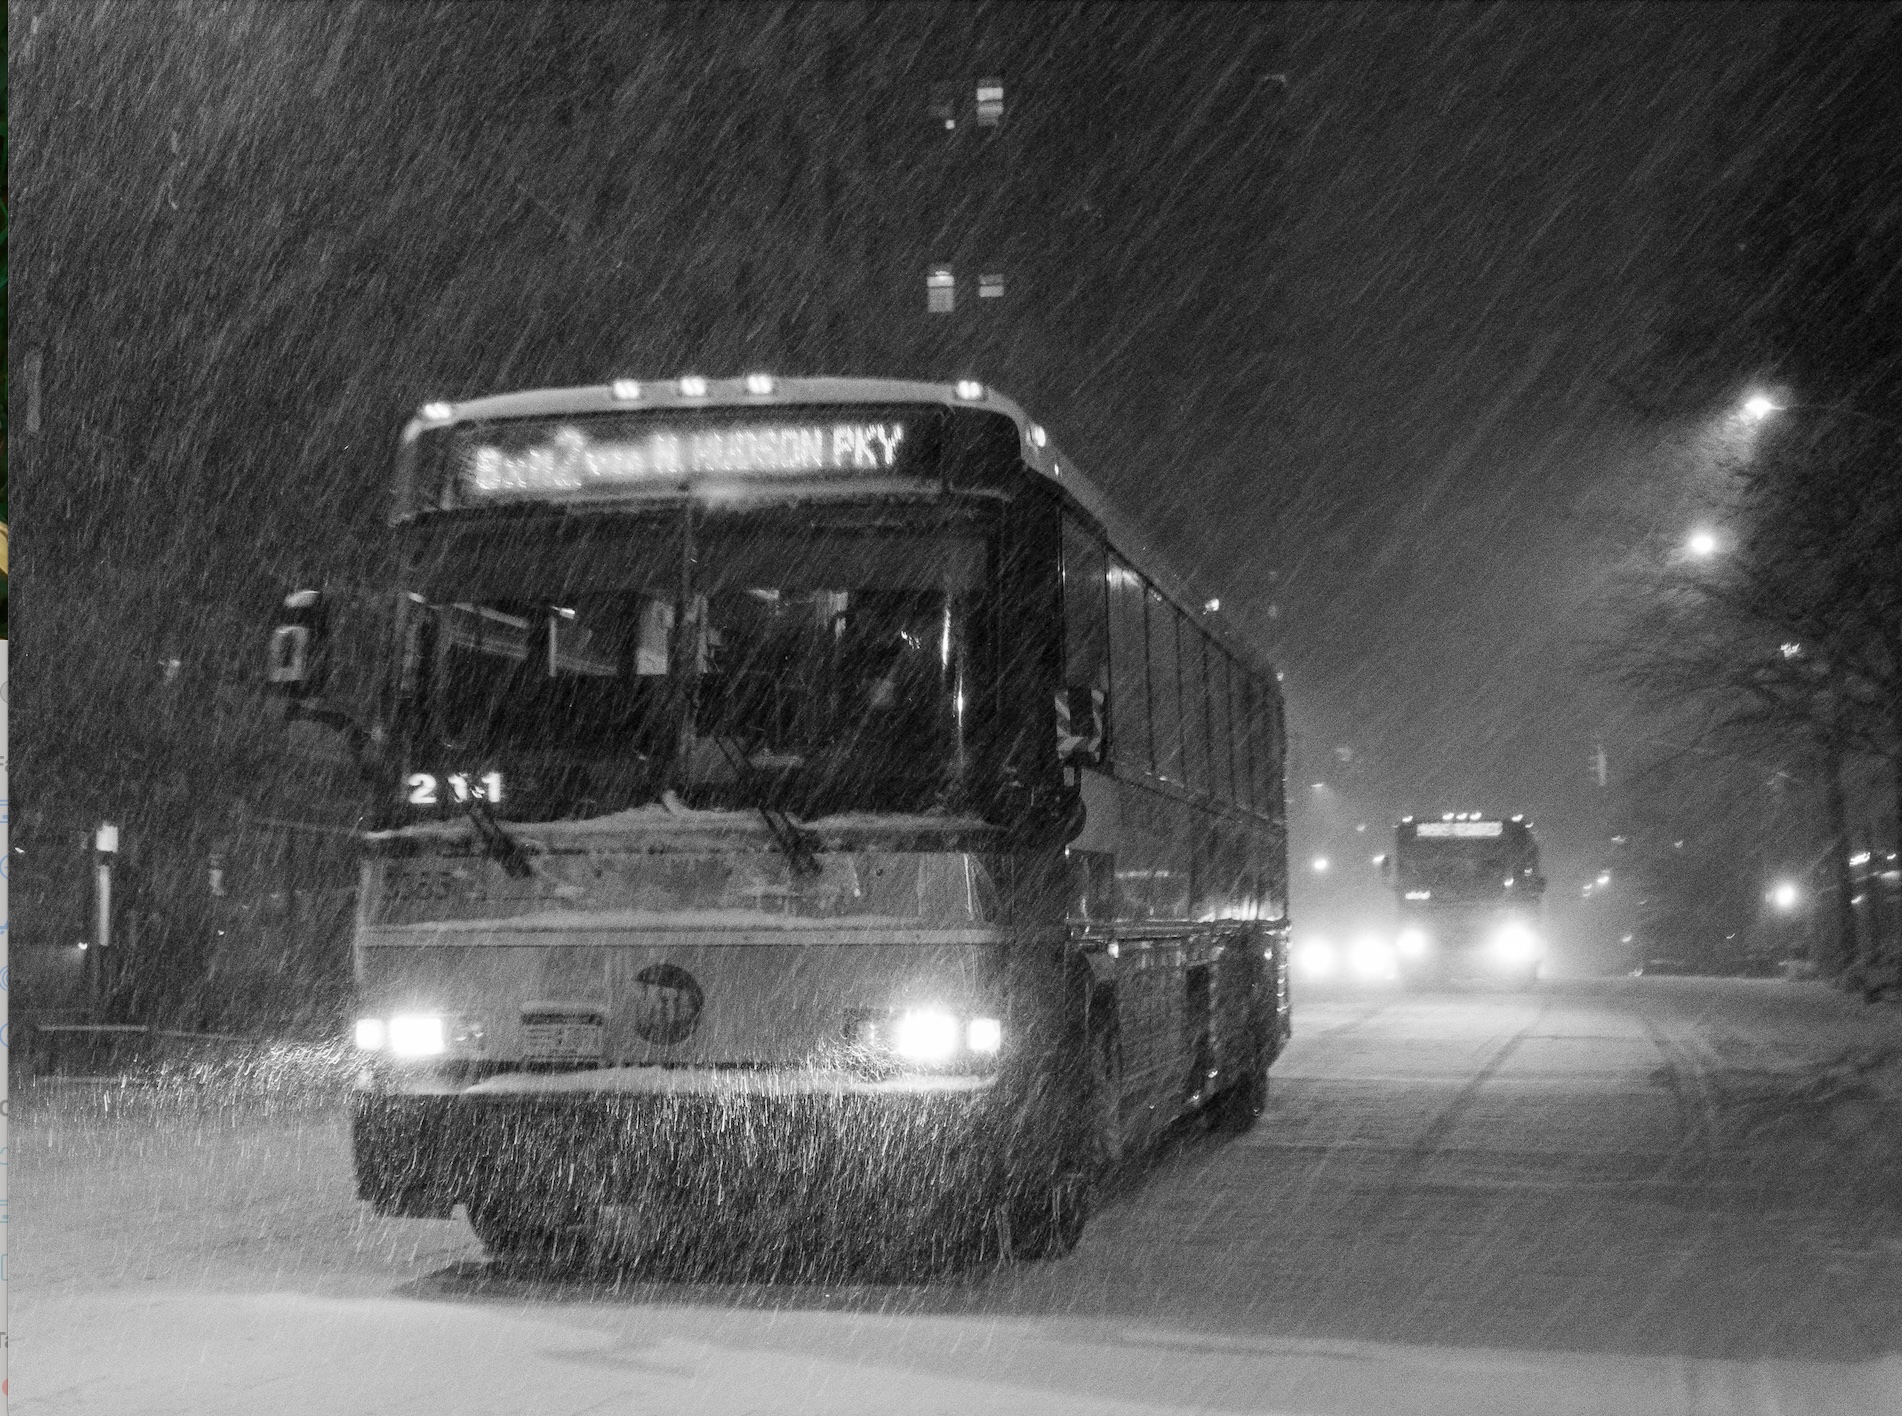 Black and white shot of bus driving in snow at night; image by Clay LeConey, via Unsplash.com.